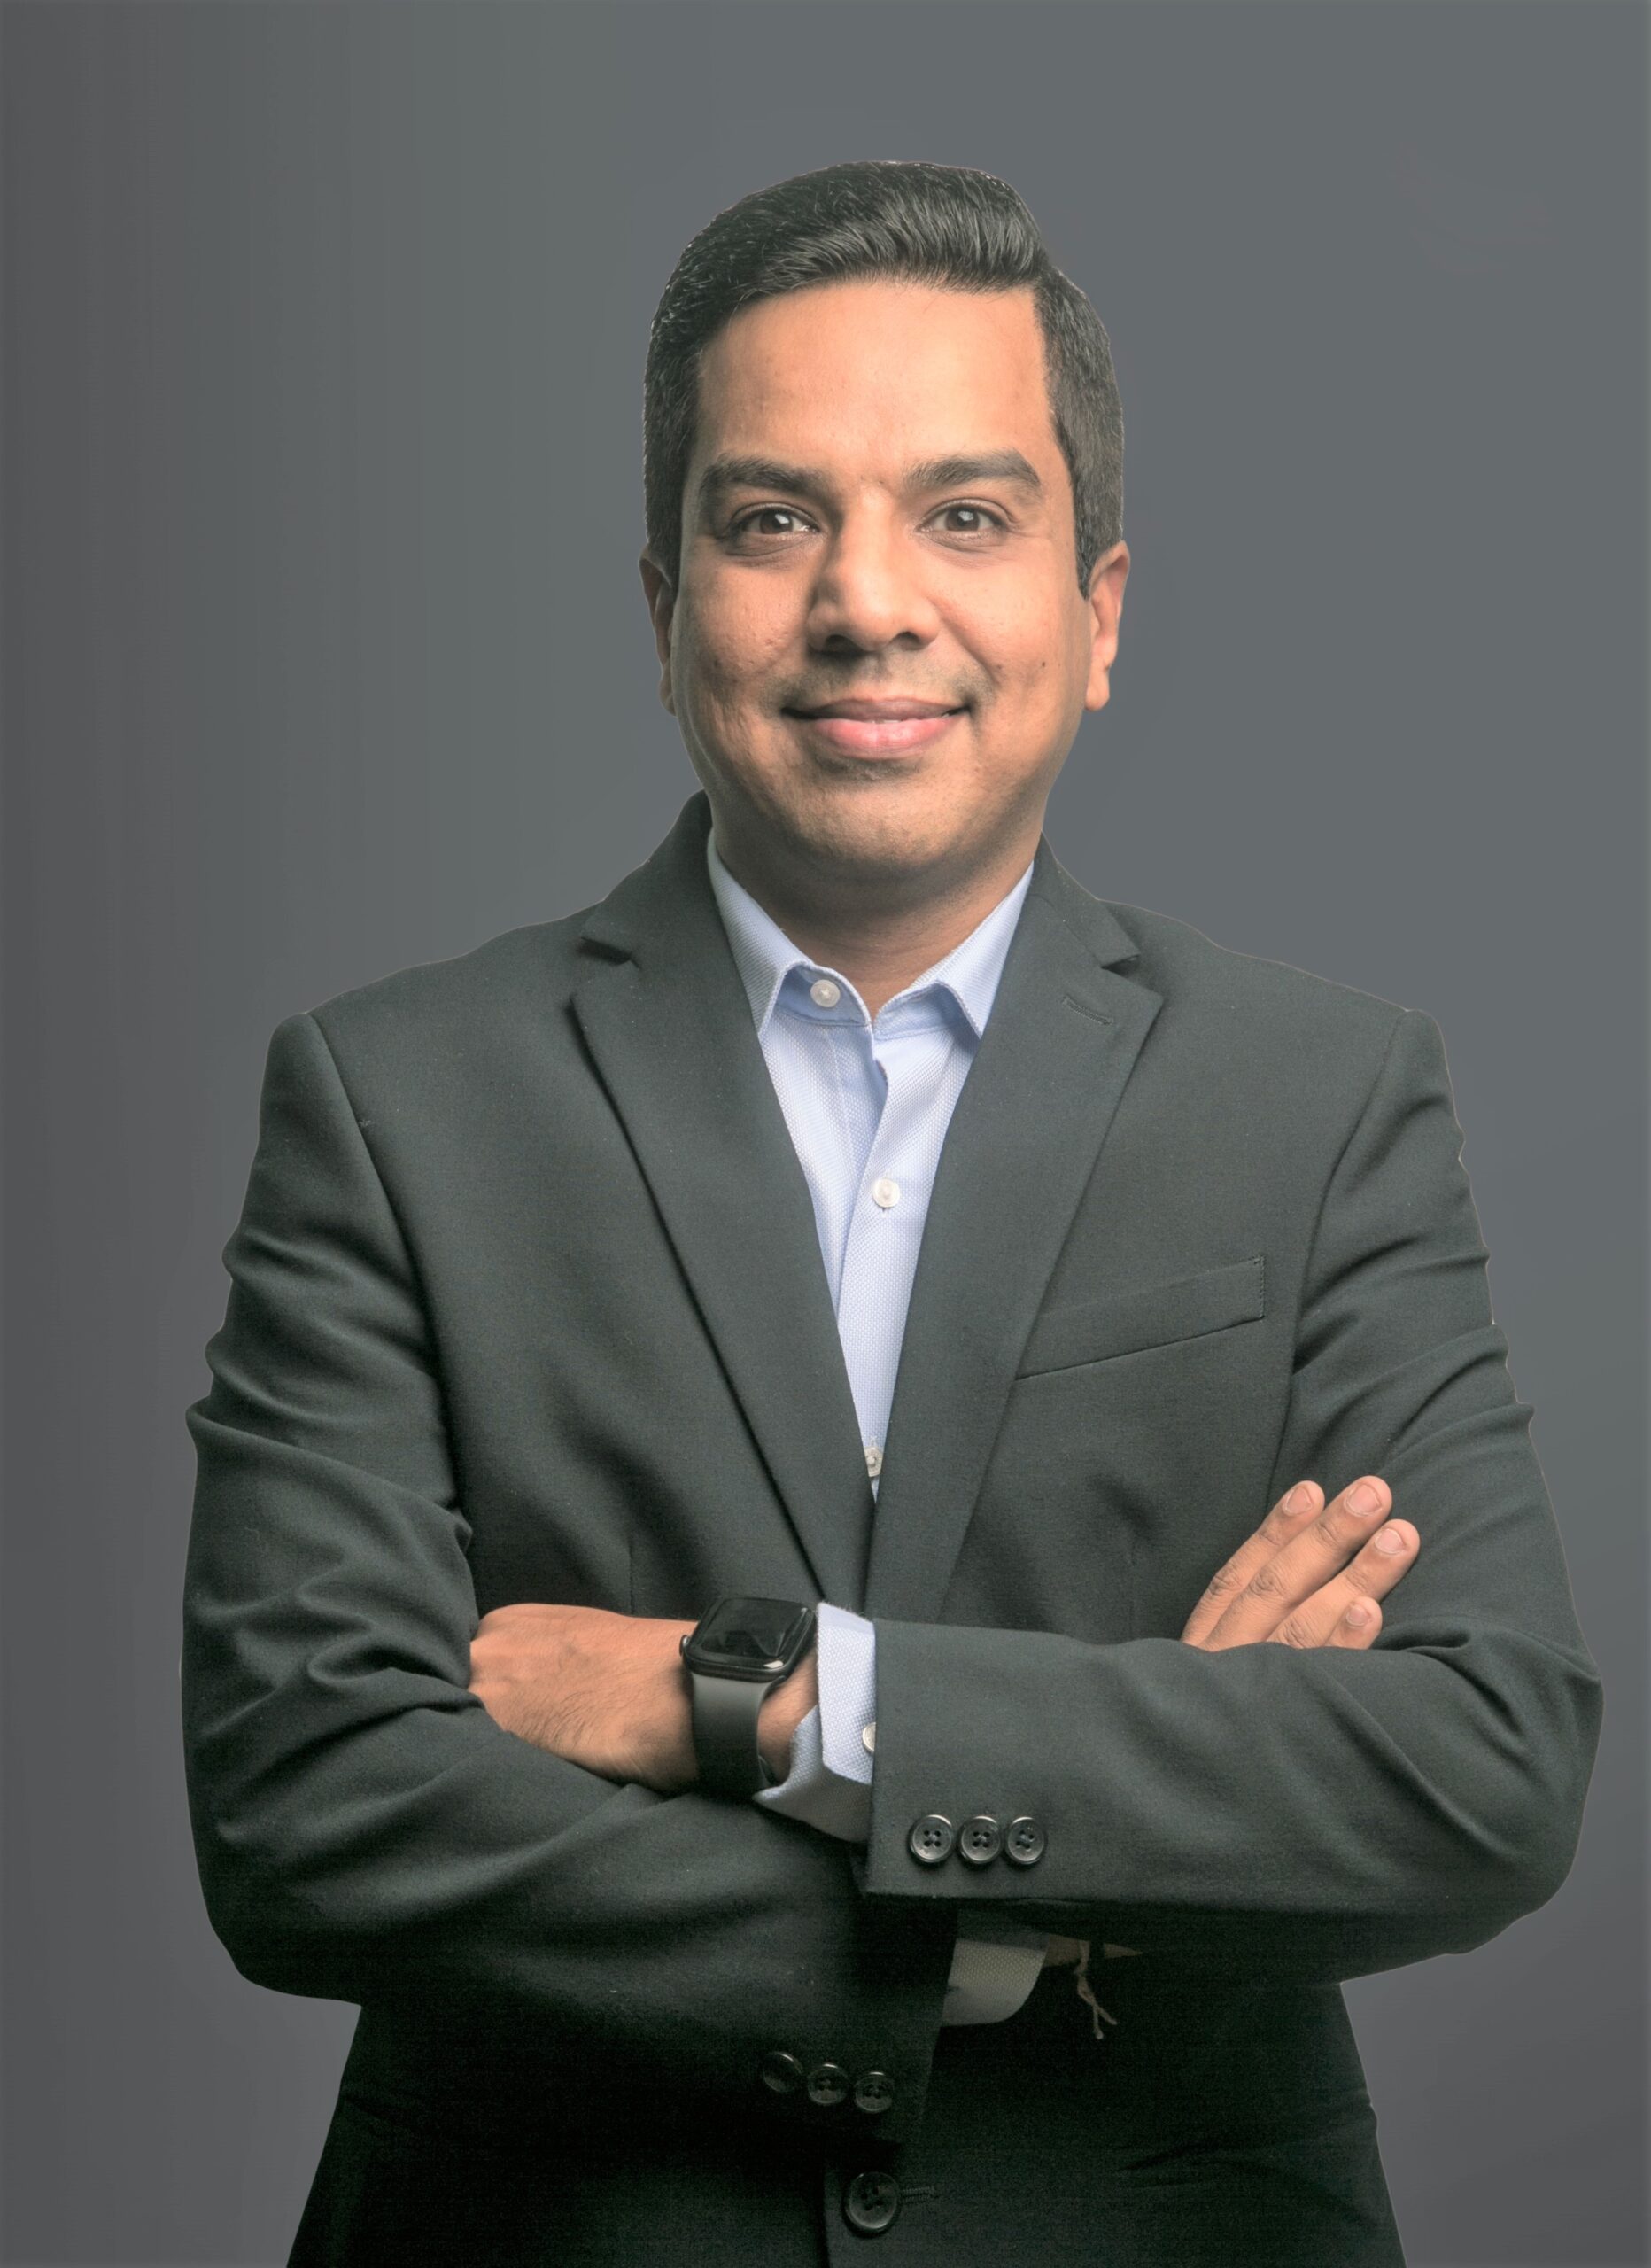 Collinson promotes Saurabh Malhotra as Director Partnerships, South Asia and Indochina